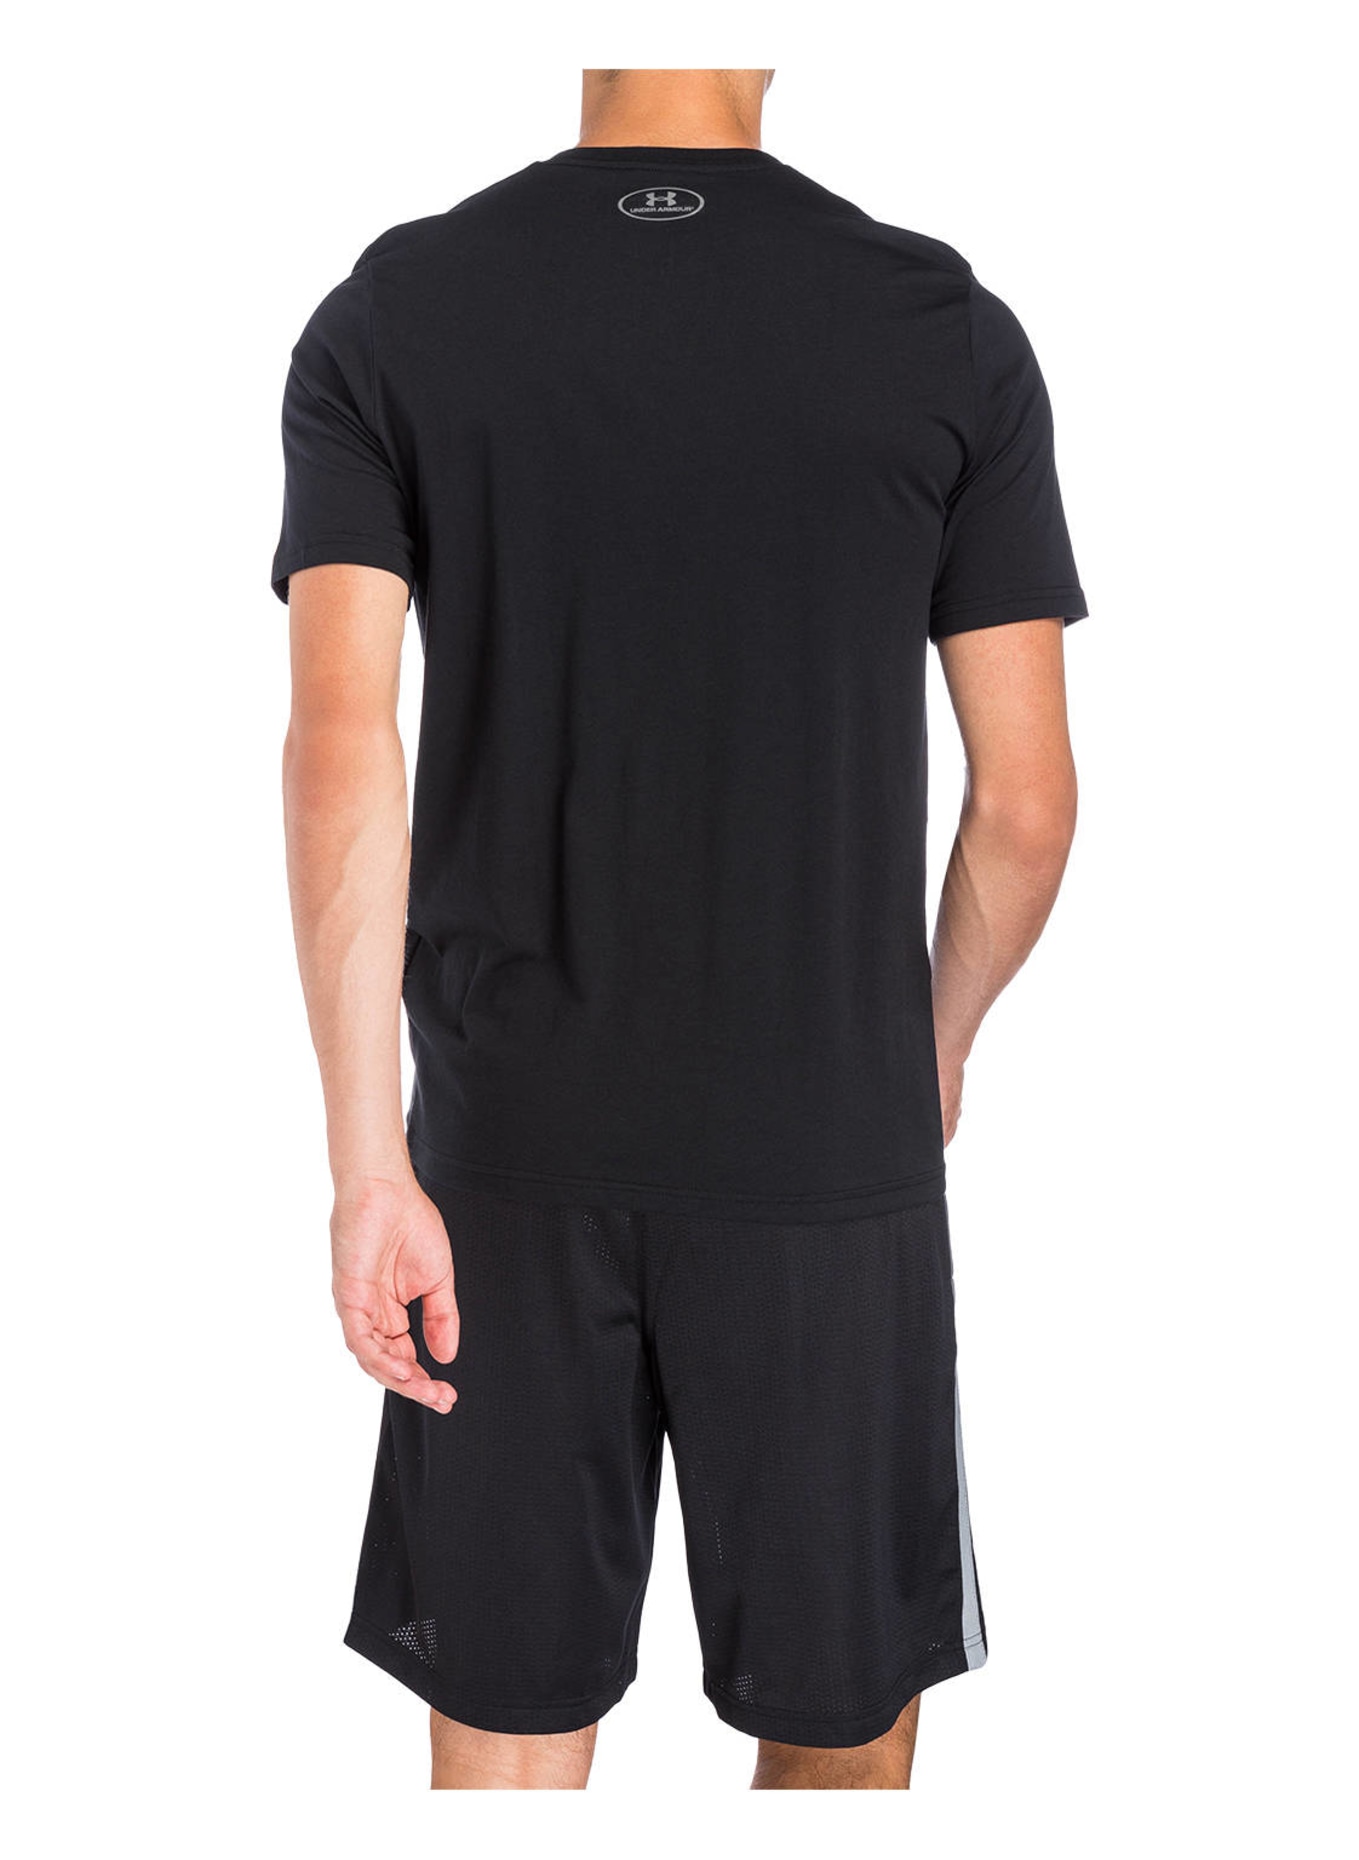 UNDER ARMOUR T-shirt TEAM ISSUE, Color: BLACK (Image 3)